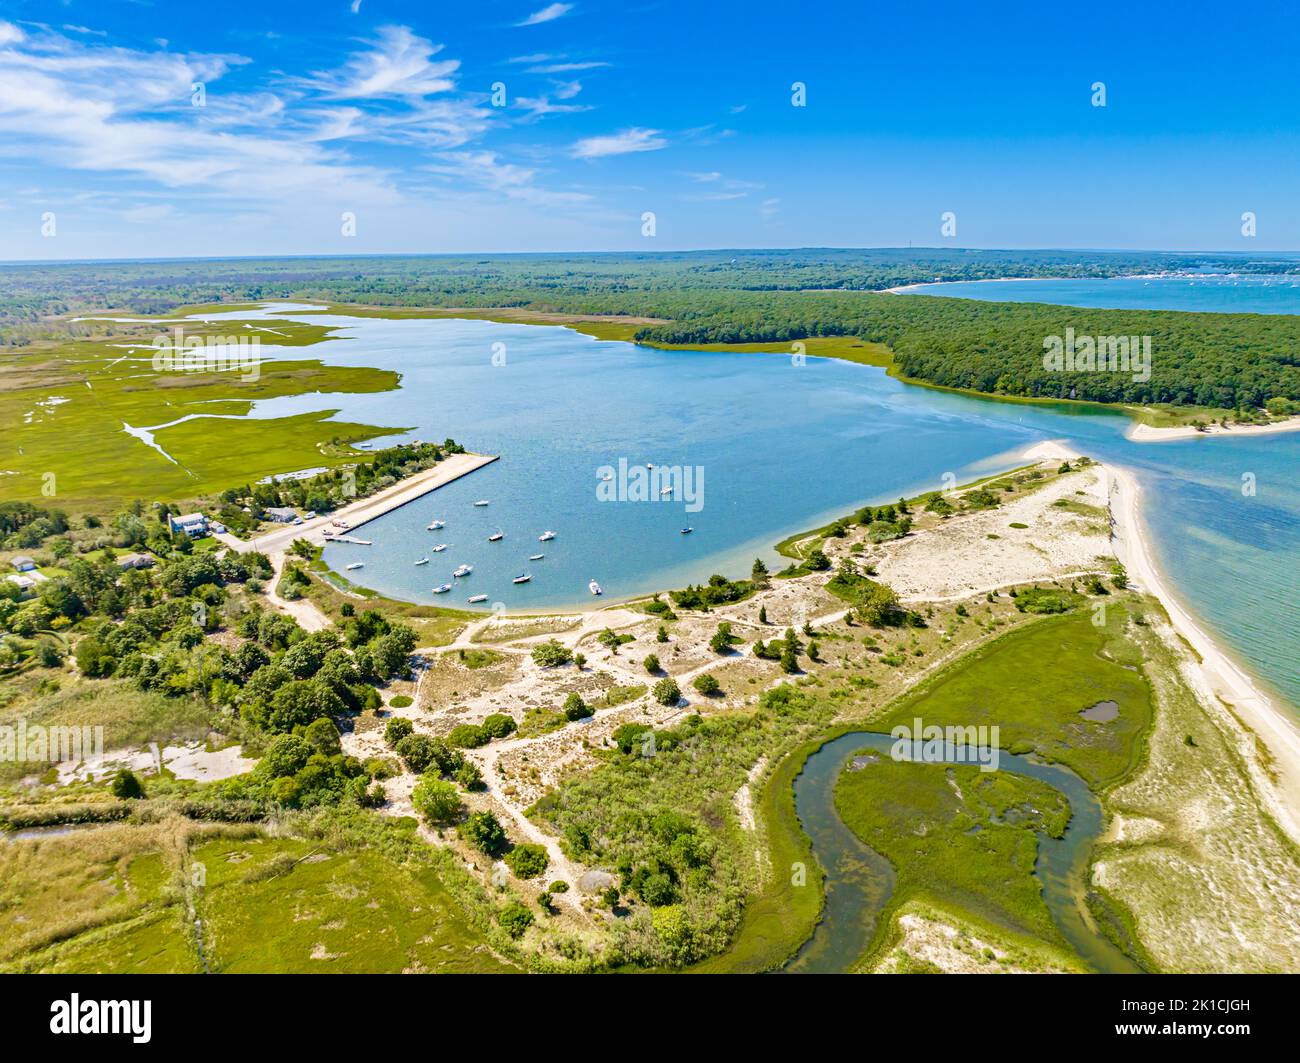 Aerial images of Northwest harbor county park Stock Photo